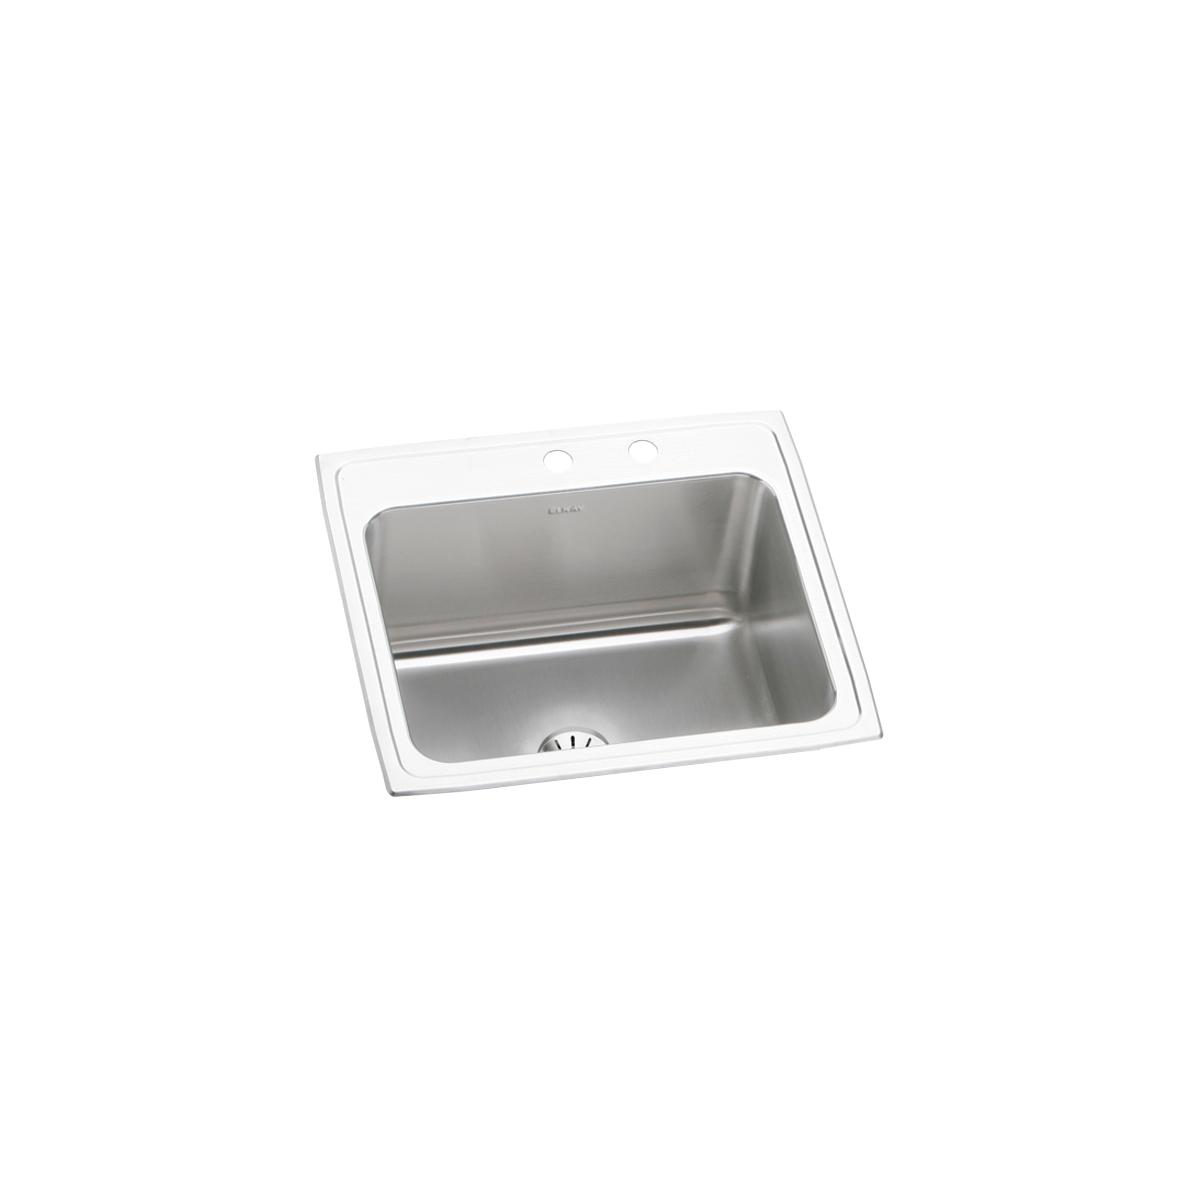 Elkay Lustertone Classic 25" x 22" x 10-3/8" MR2-Hole Single Bowl Drop-in Sink with Perfect Drain